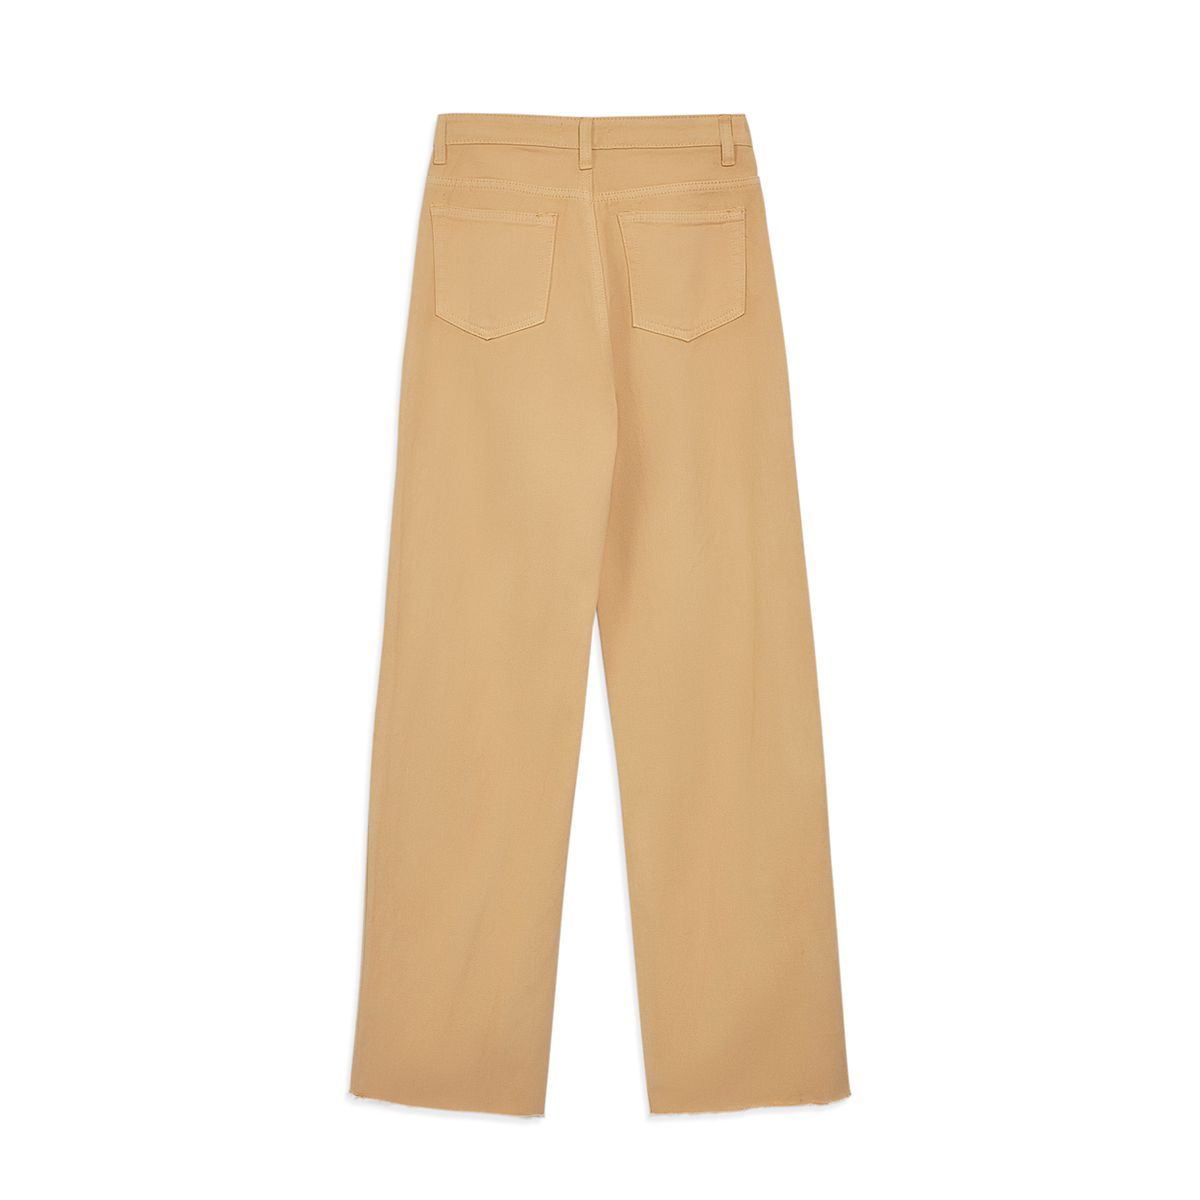 Coloured Aesthtic Long Jeans